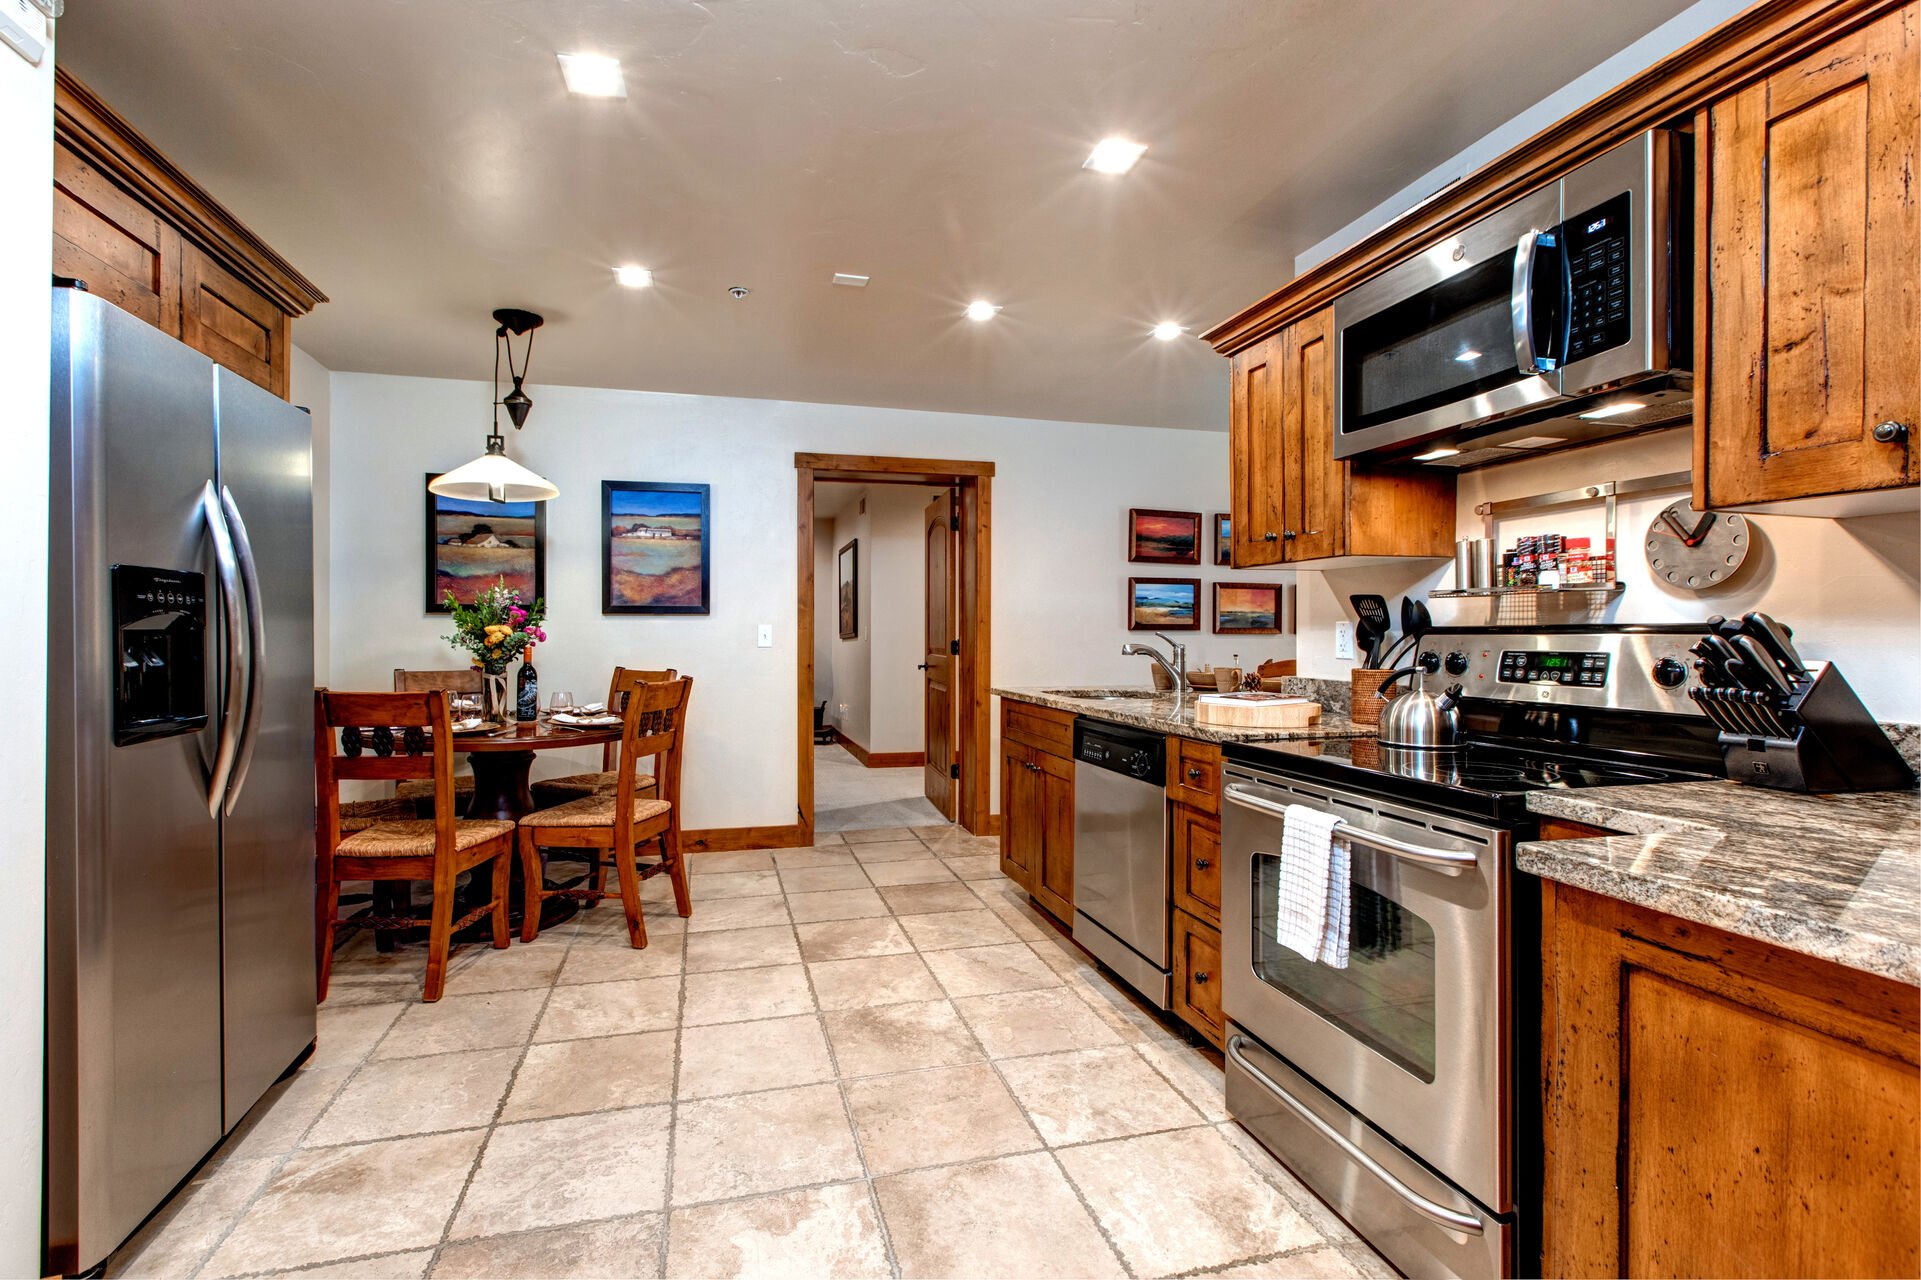 Fully Equipped Kitchen Area with stainless steel appliances, ice maker, ample stone countertop space, dining table for 5, and bar seating for 2.